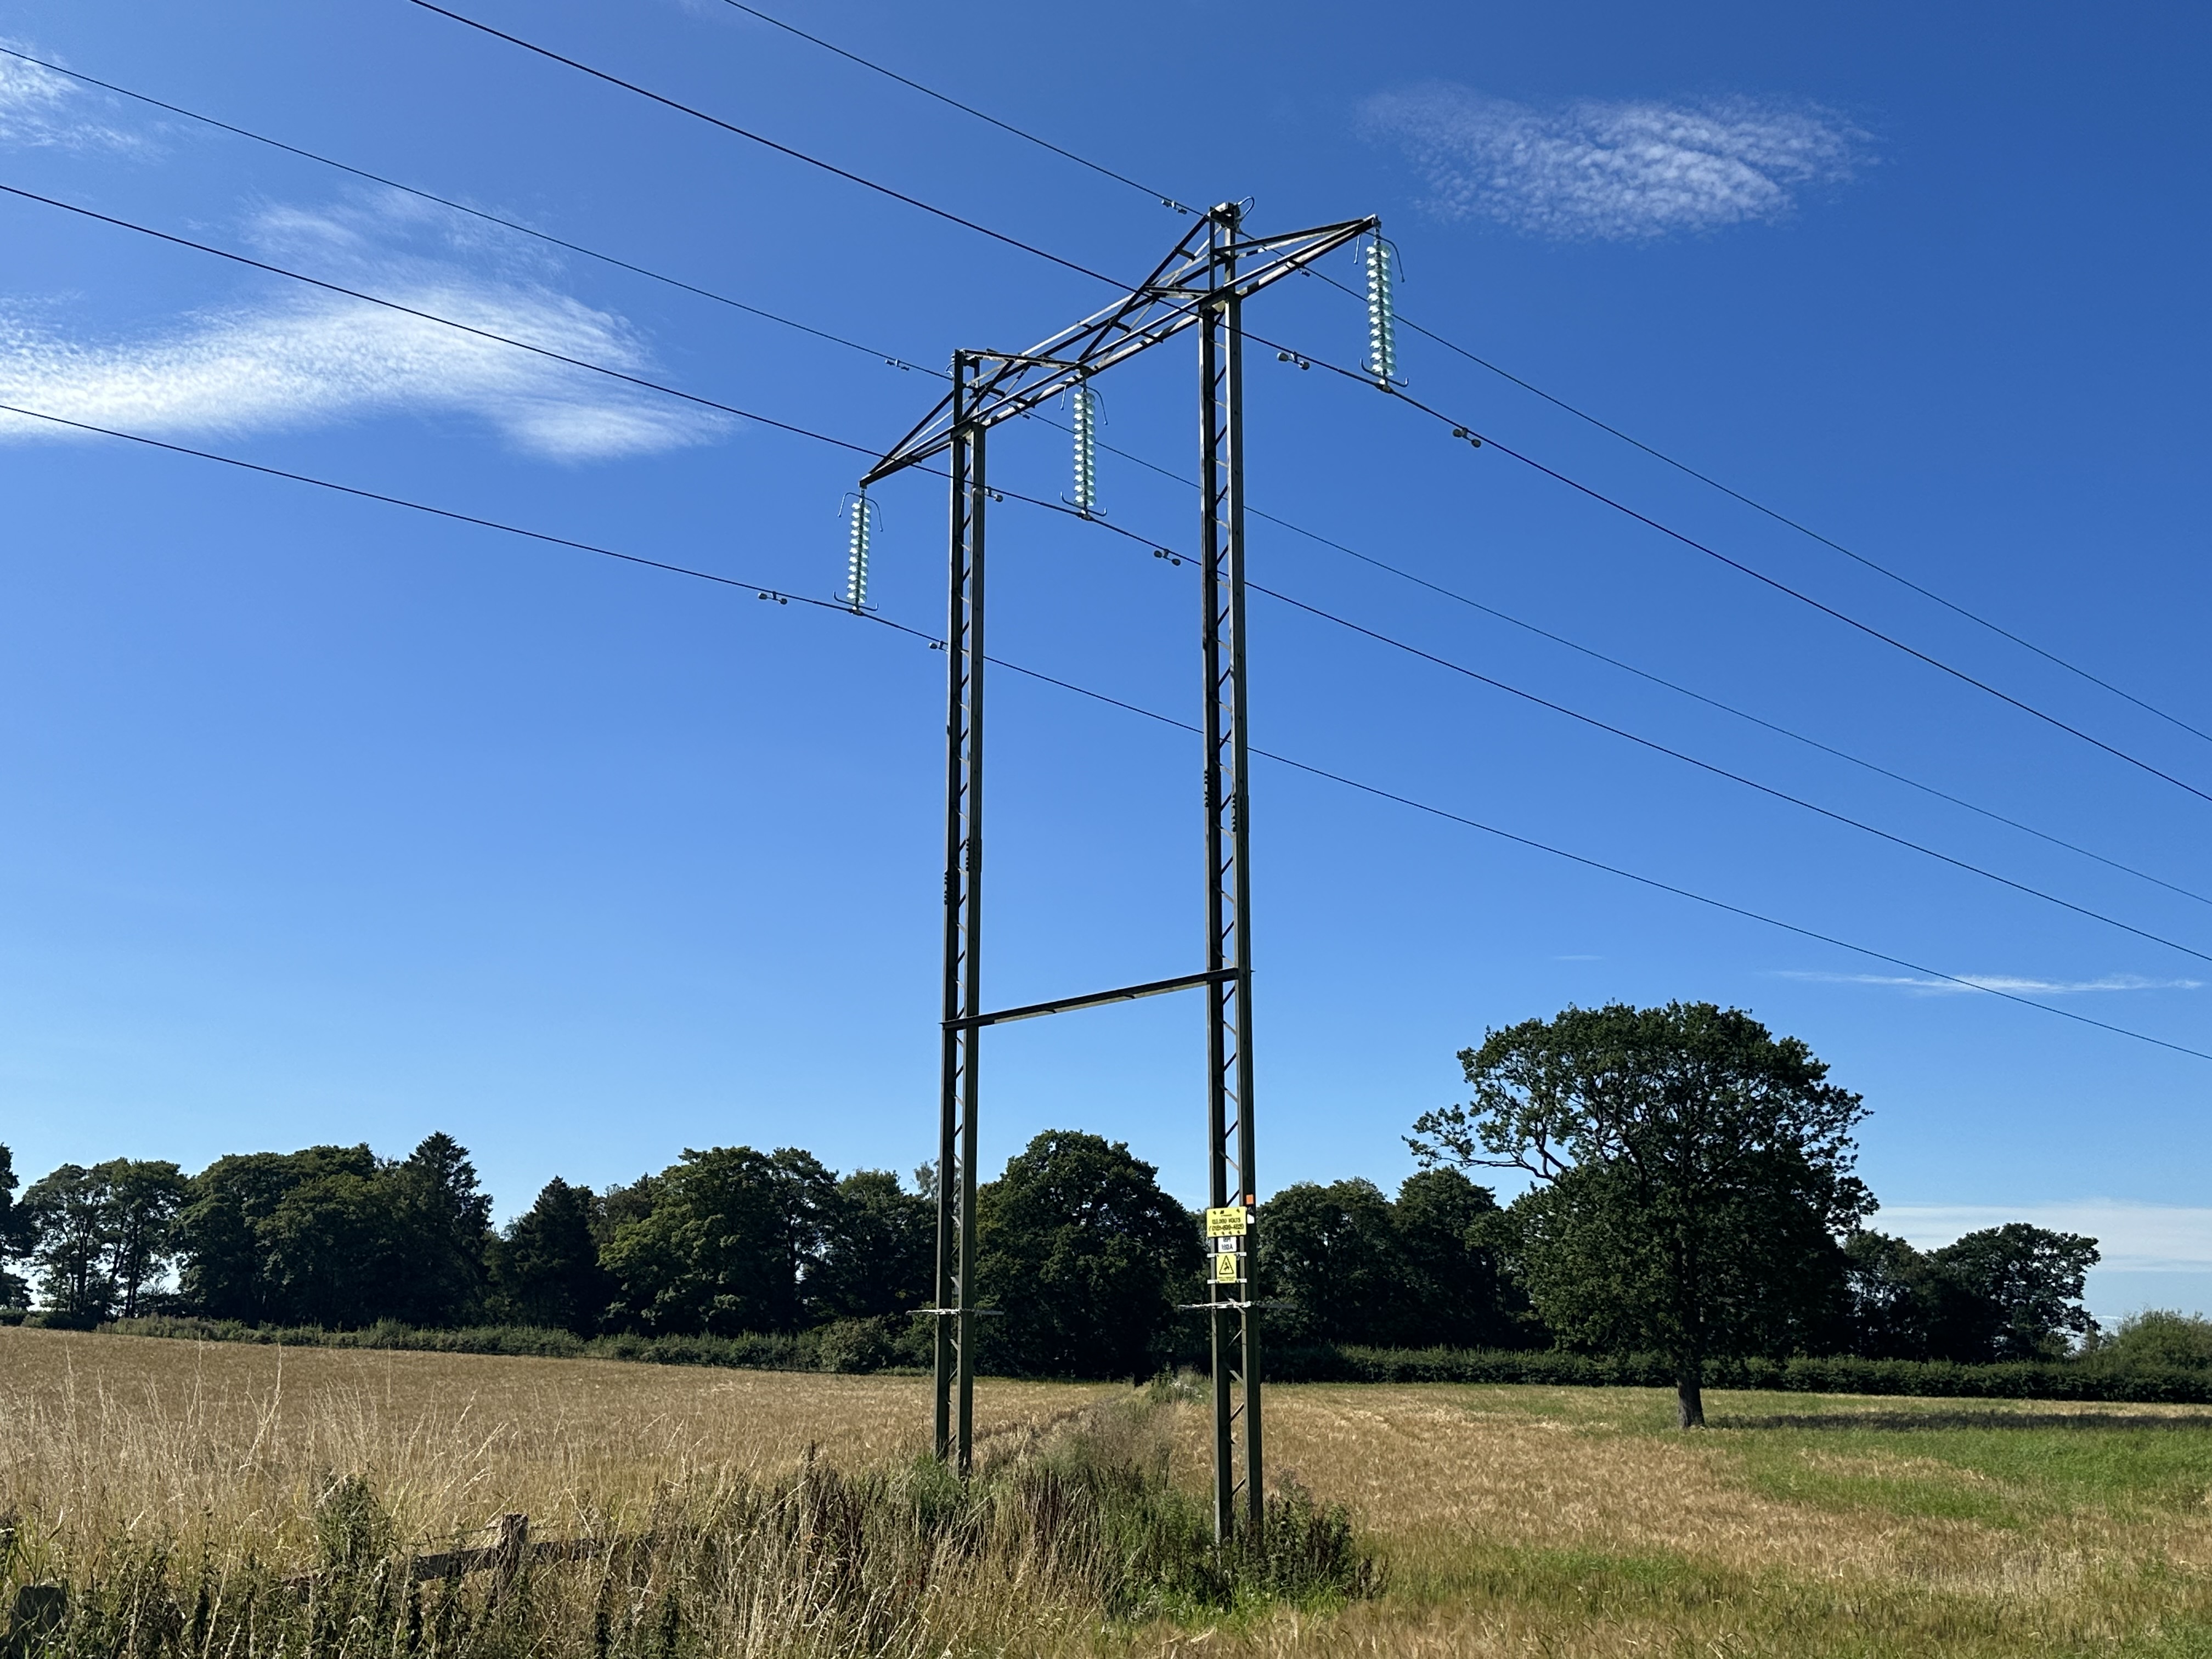 SP Energy Networks’ £5million investment futureproofs electricity network in North West England and North Wales 